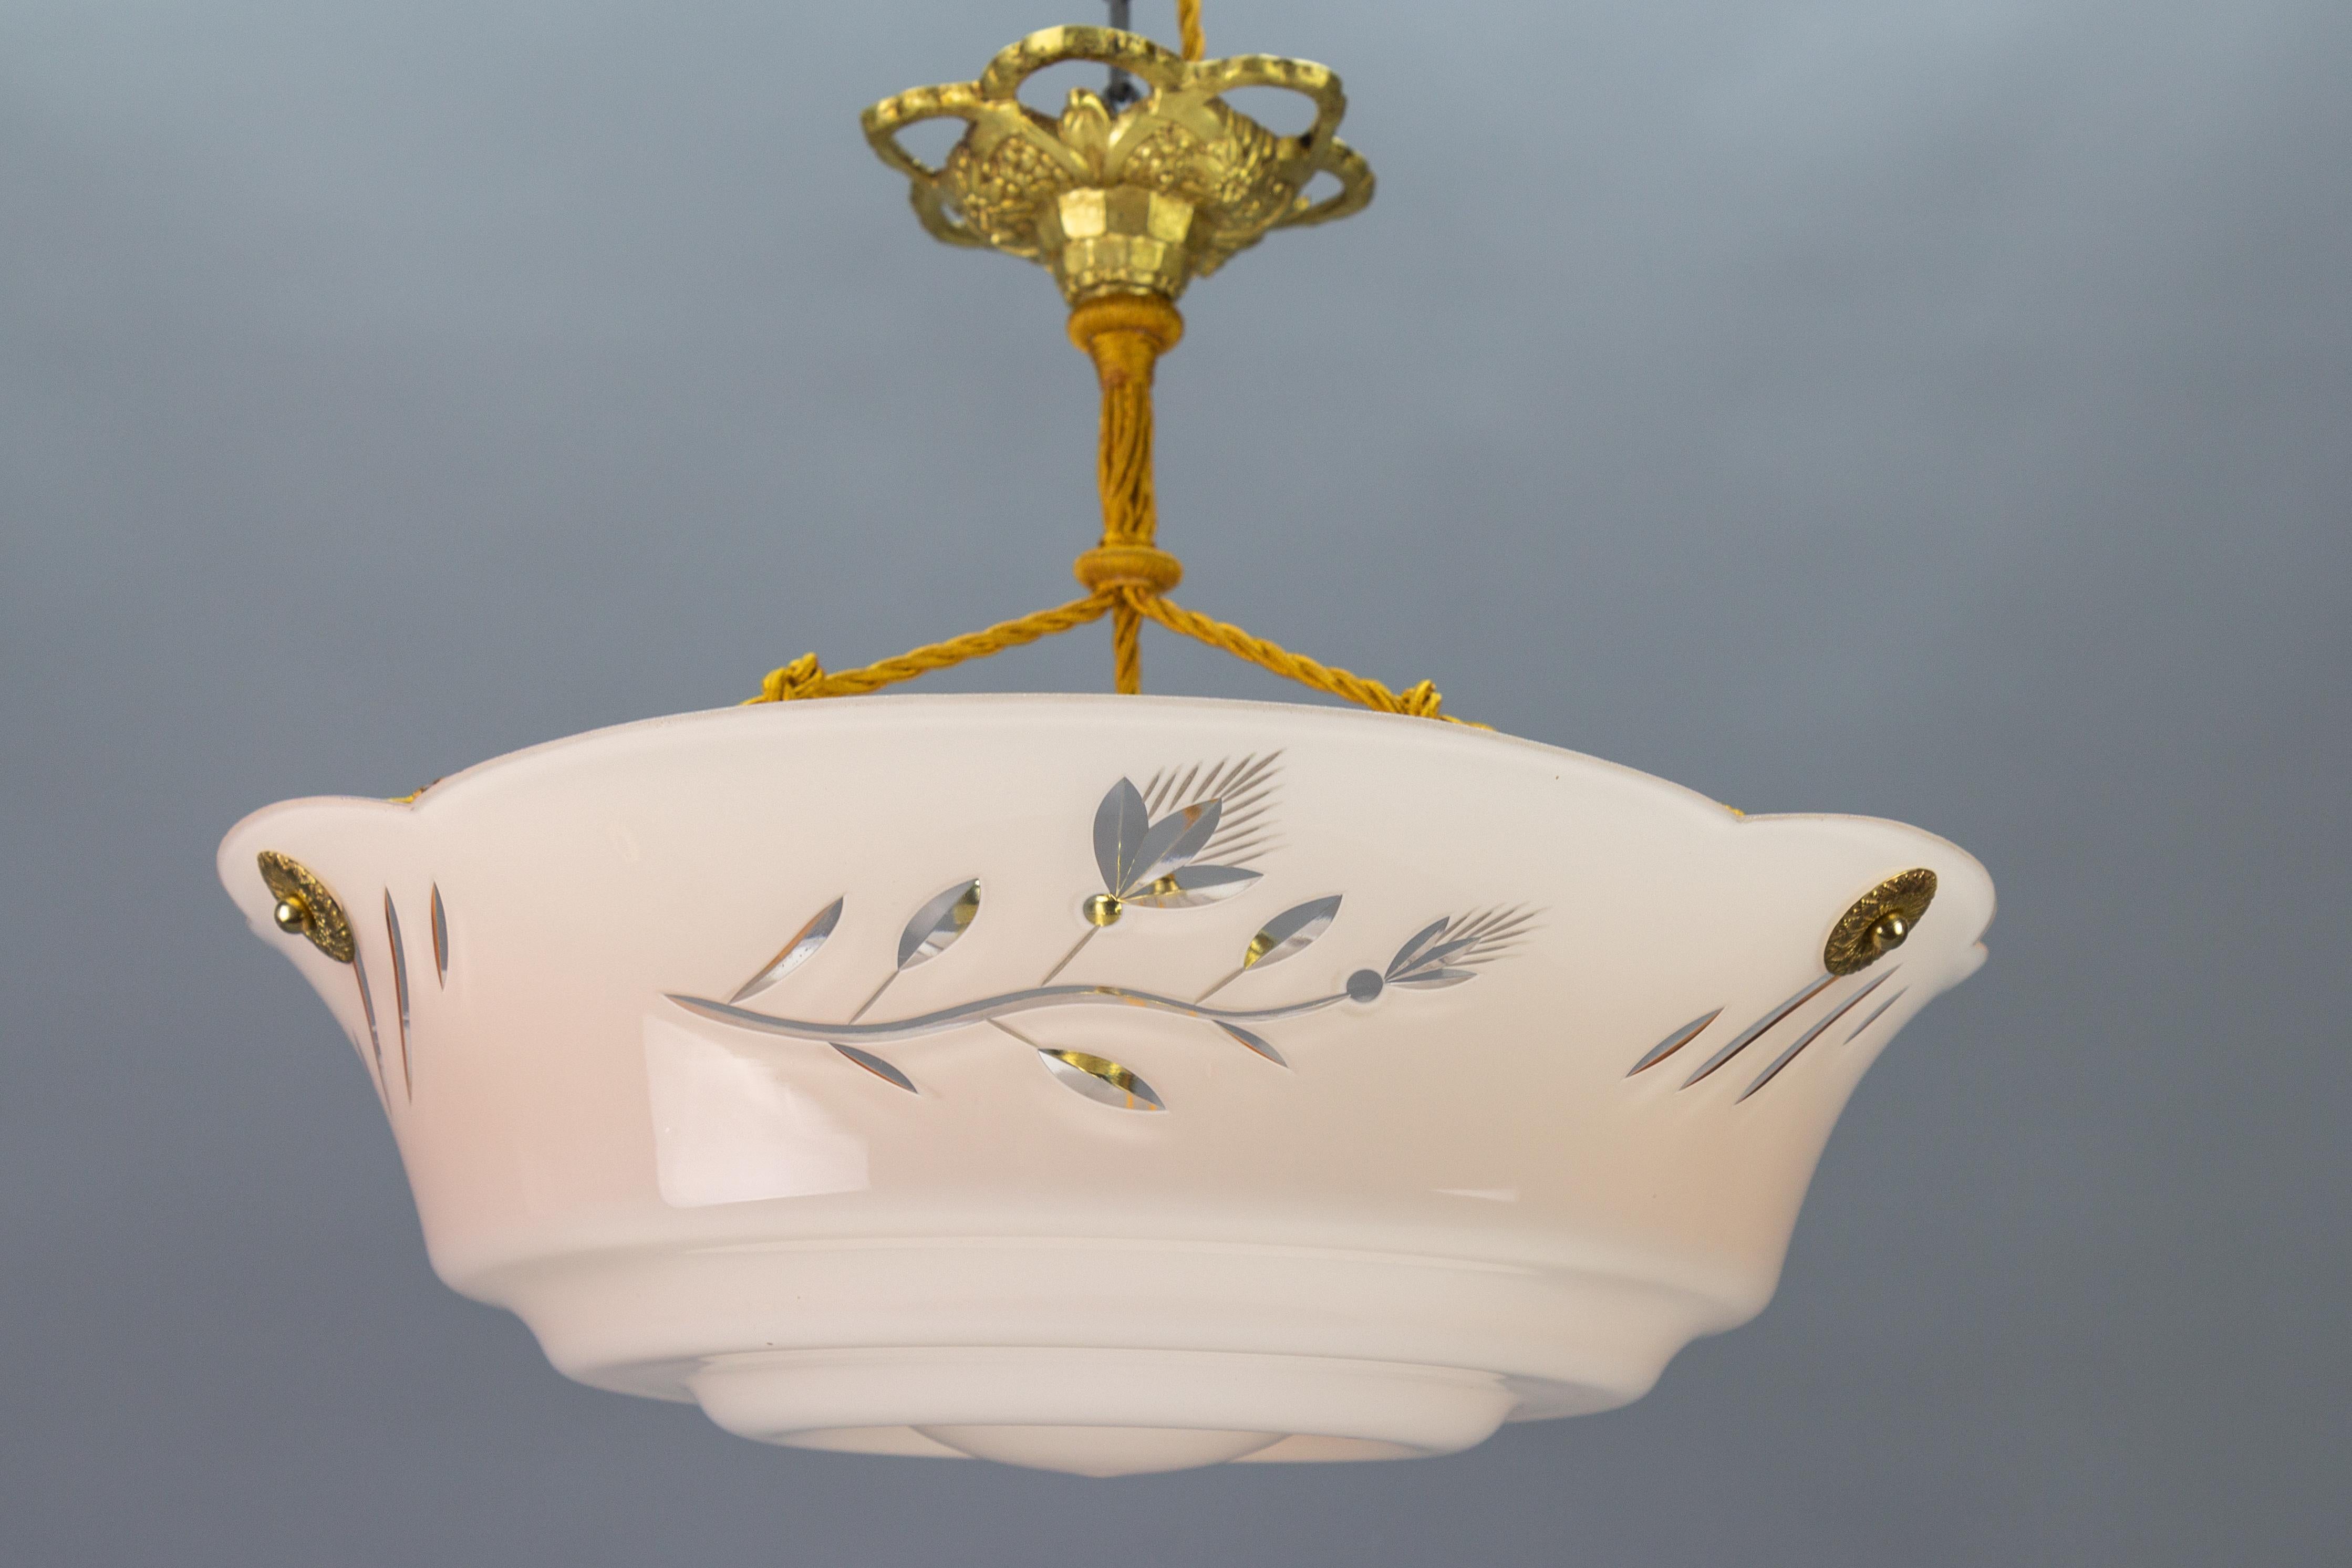 German Art Deco period pastel pink cut glass pendant light with flower motifs, the 1930s.
A wonderful pendant ceiling light fixture from circa the 1930s. The beautifully shaped glass bowl in pastel pink features a cut decoration of flowers and